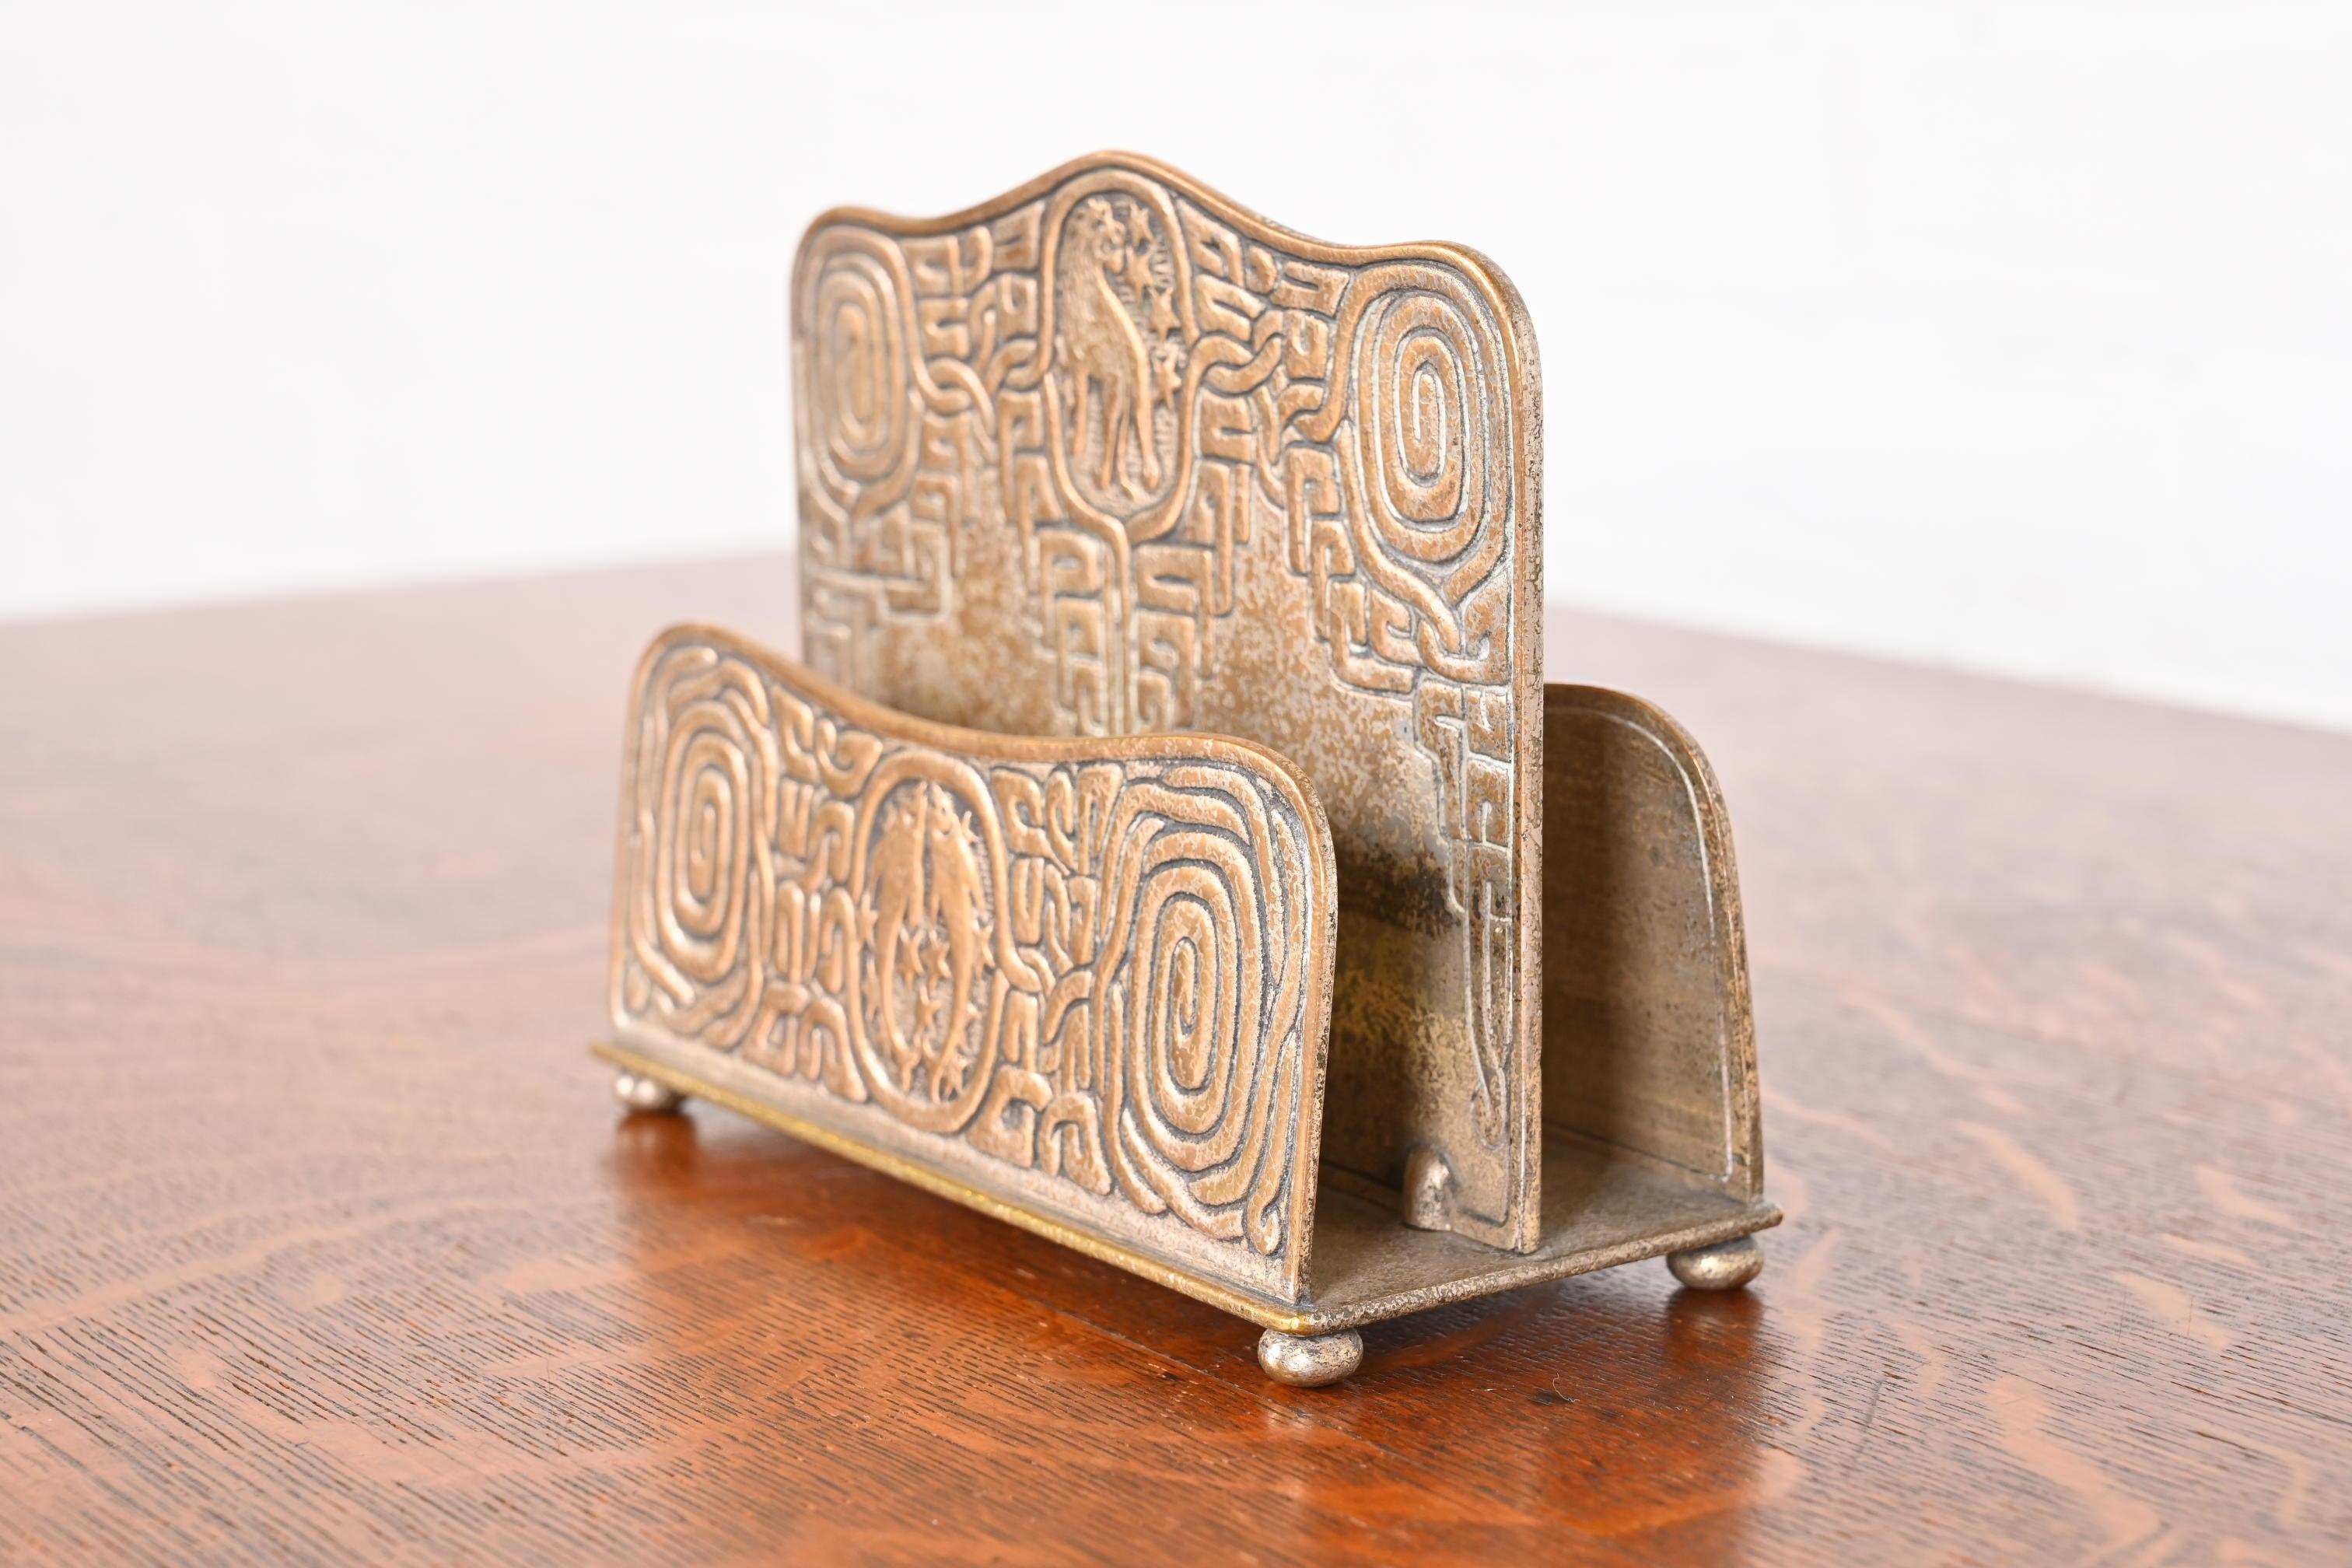 Tiffany Studios New York Zodiac Bronze Doré Double Sided Letter Rack In Good Condition For Sale In South Bend, IN